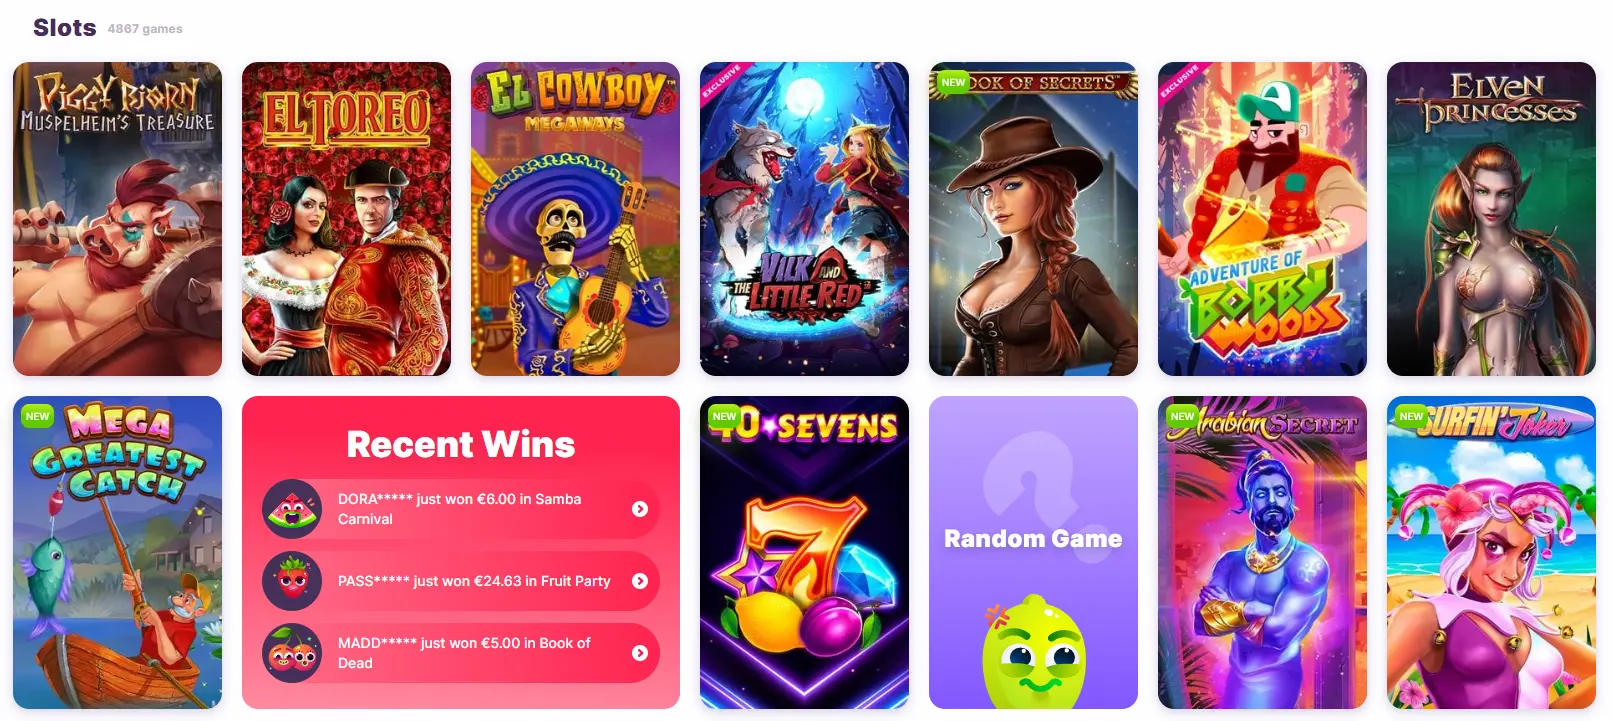 Screenshot of Best Payout Casino Slots from Official WebSite